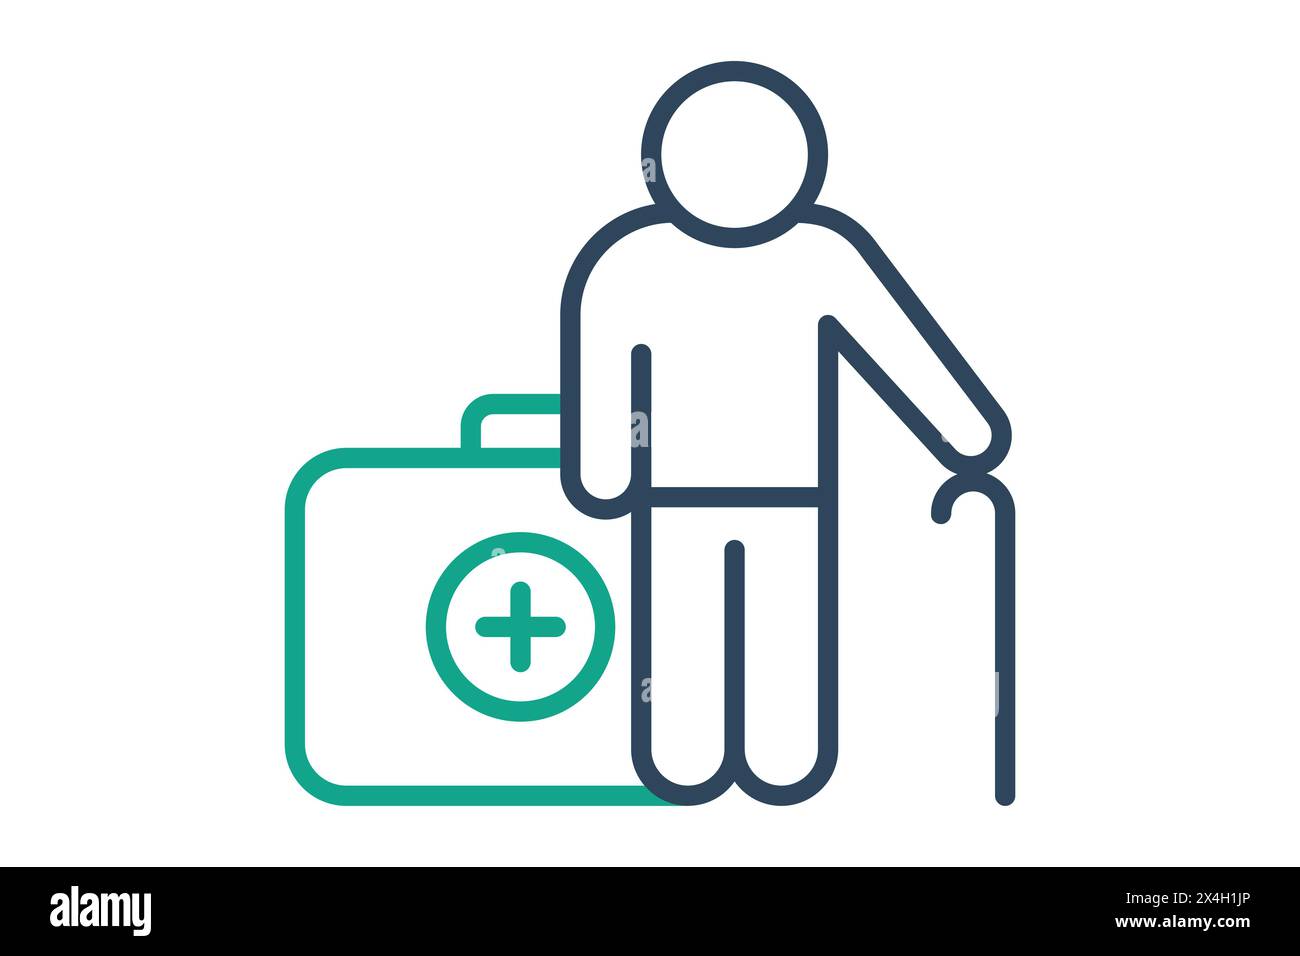 health icon. elderly using walking stick with health box. icon related to elderly. line icon style. old age element illustration Stock Vector